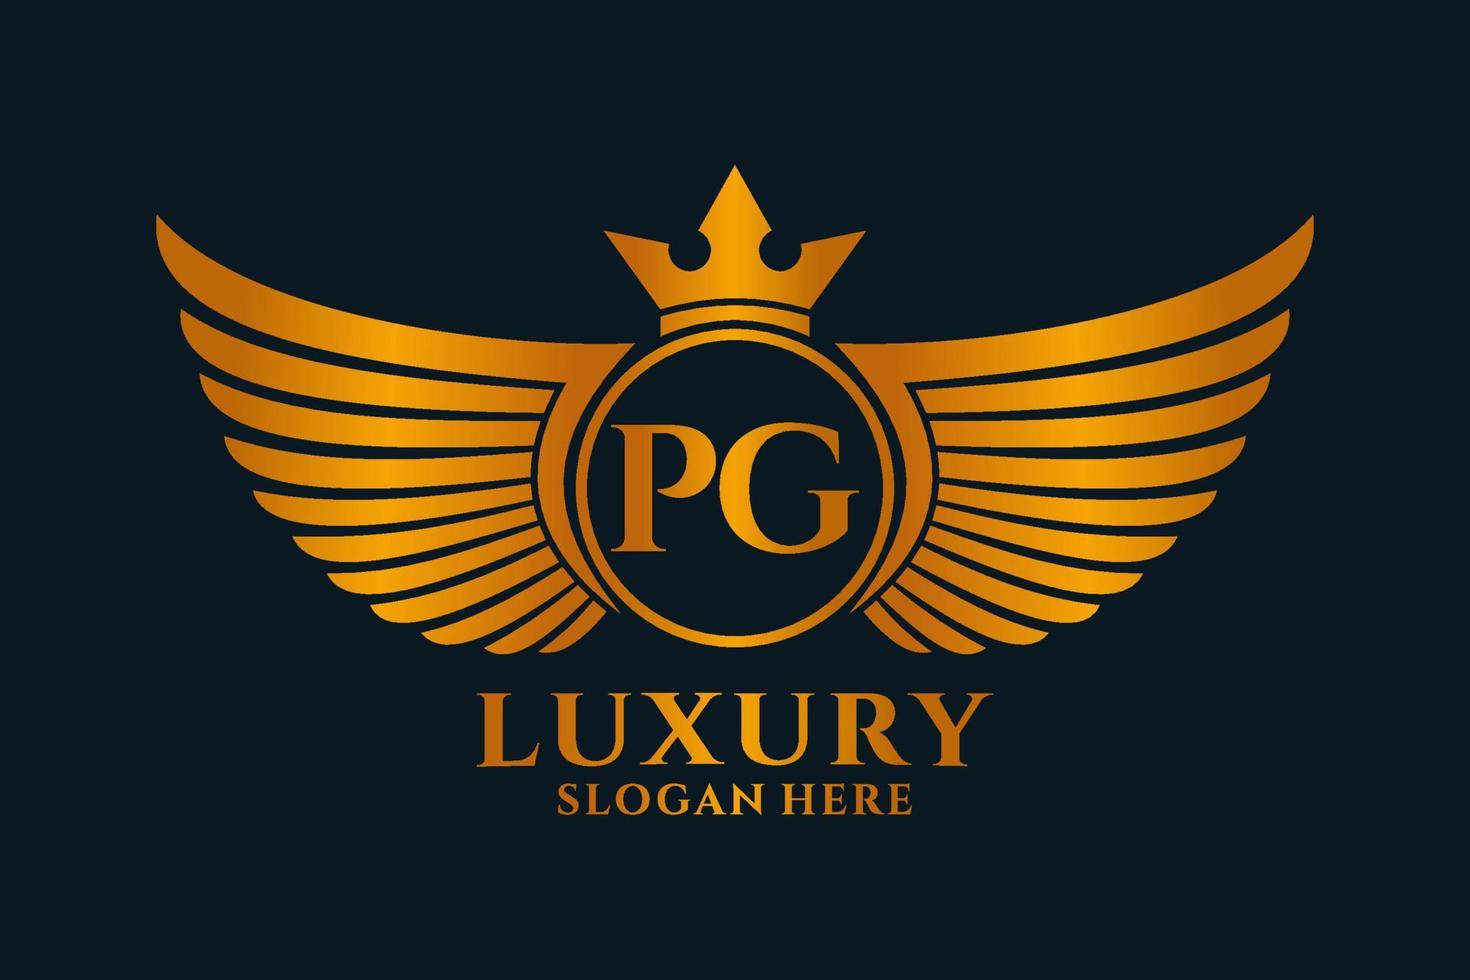 Luxury royal wing Letter PG crest Gold color Logo vector, Victory logo, crest logo, wing logo, vector logo template.